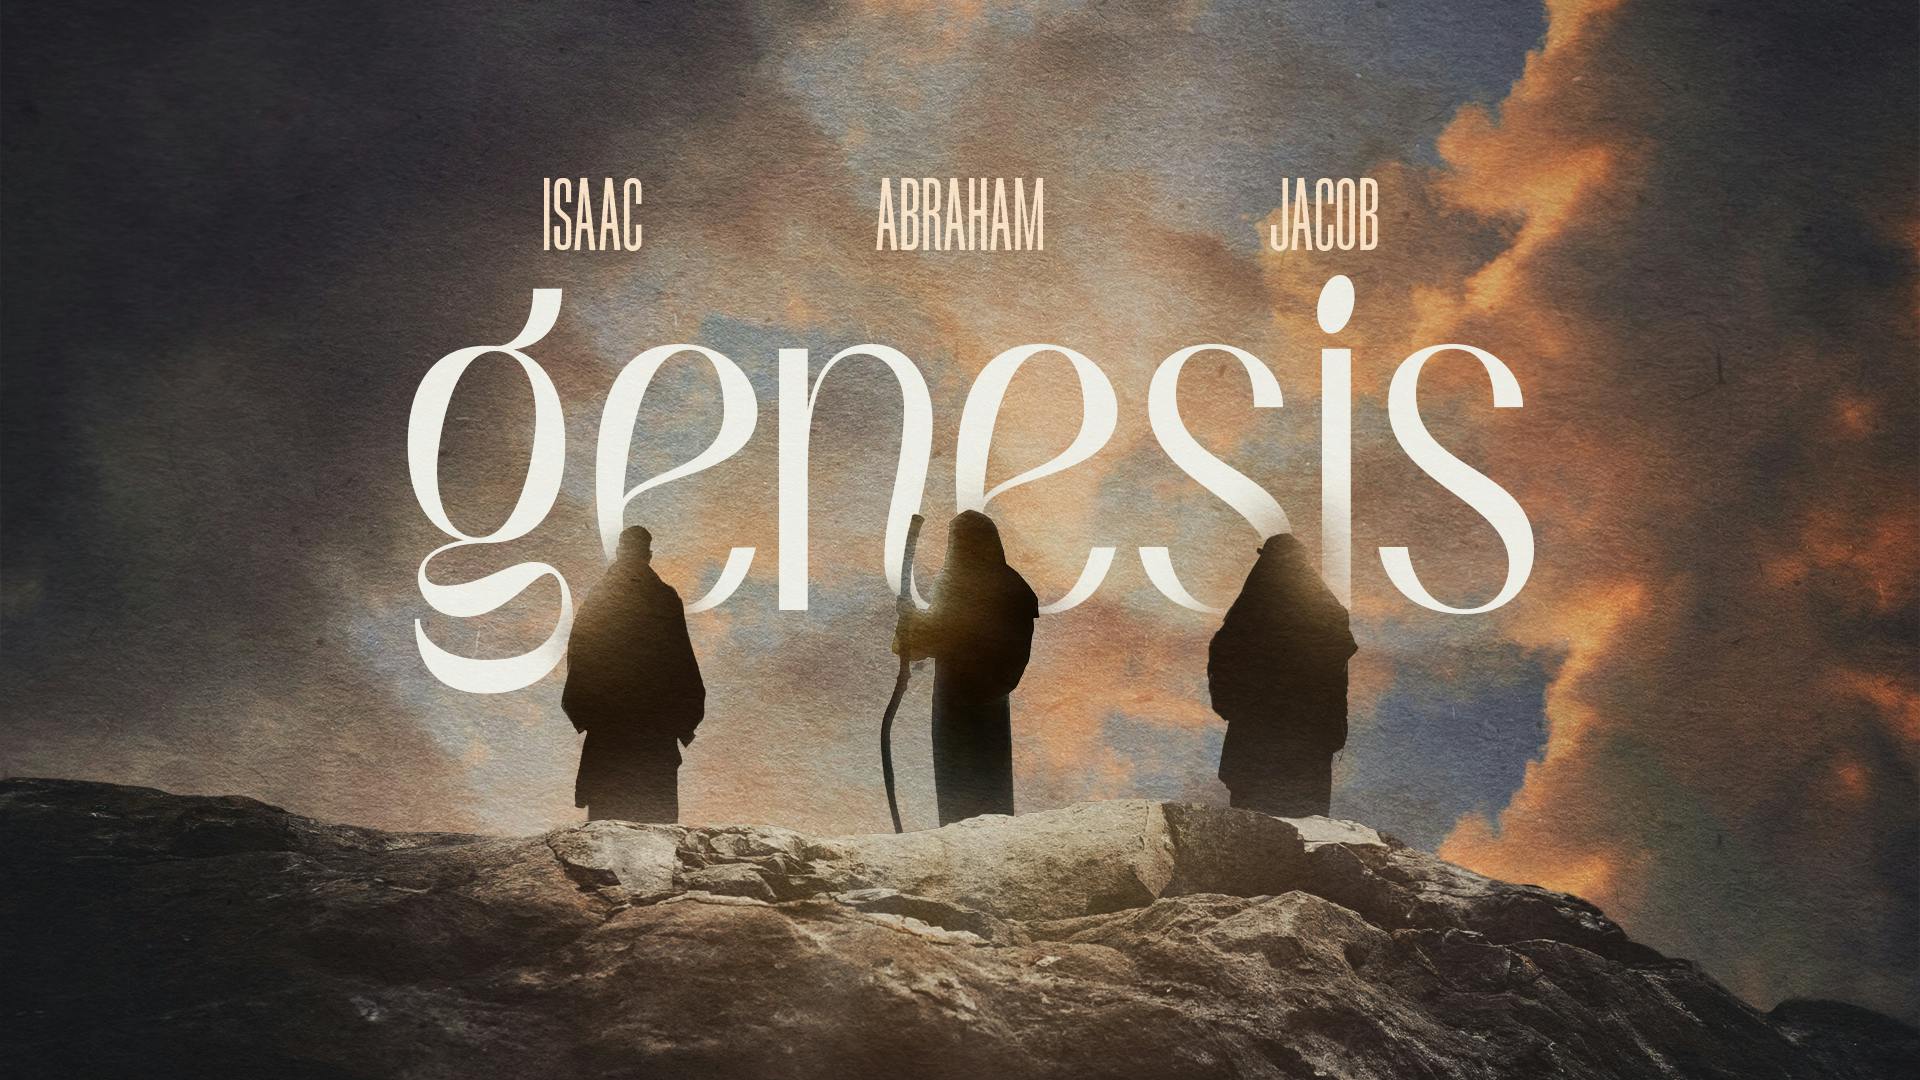 Genesis - Abraham, Isaac, and Jacob: Jacob Wrestles God cover for post